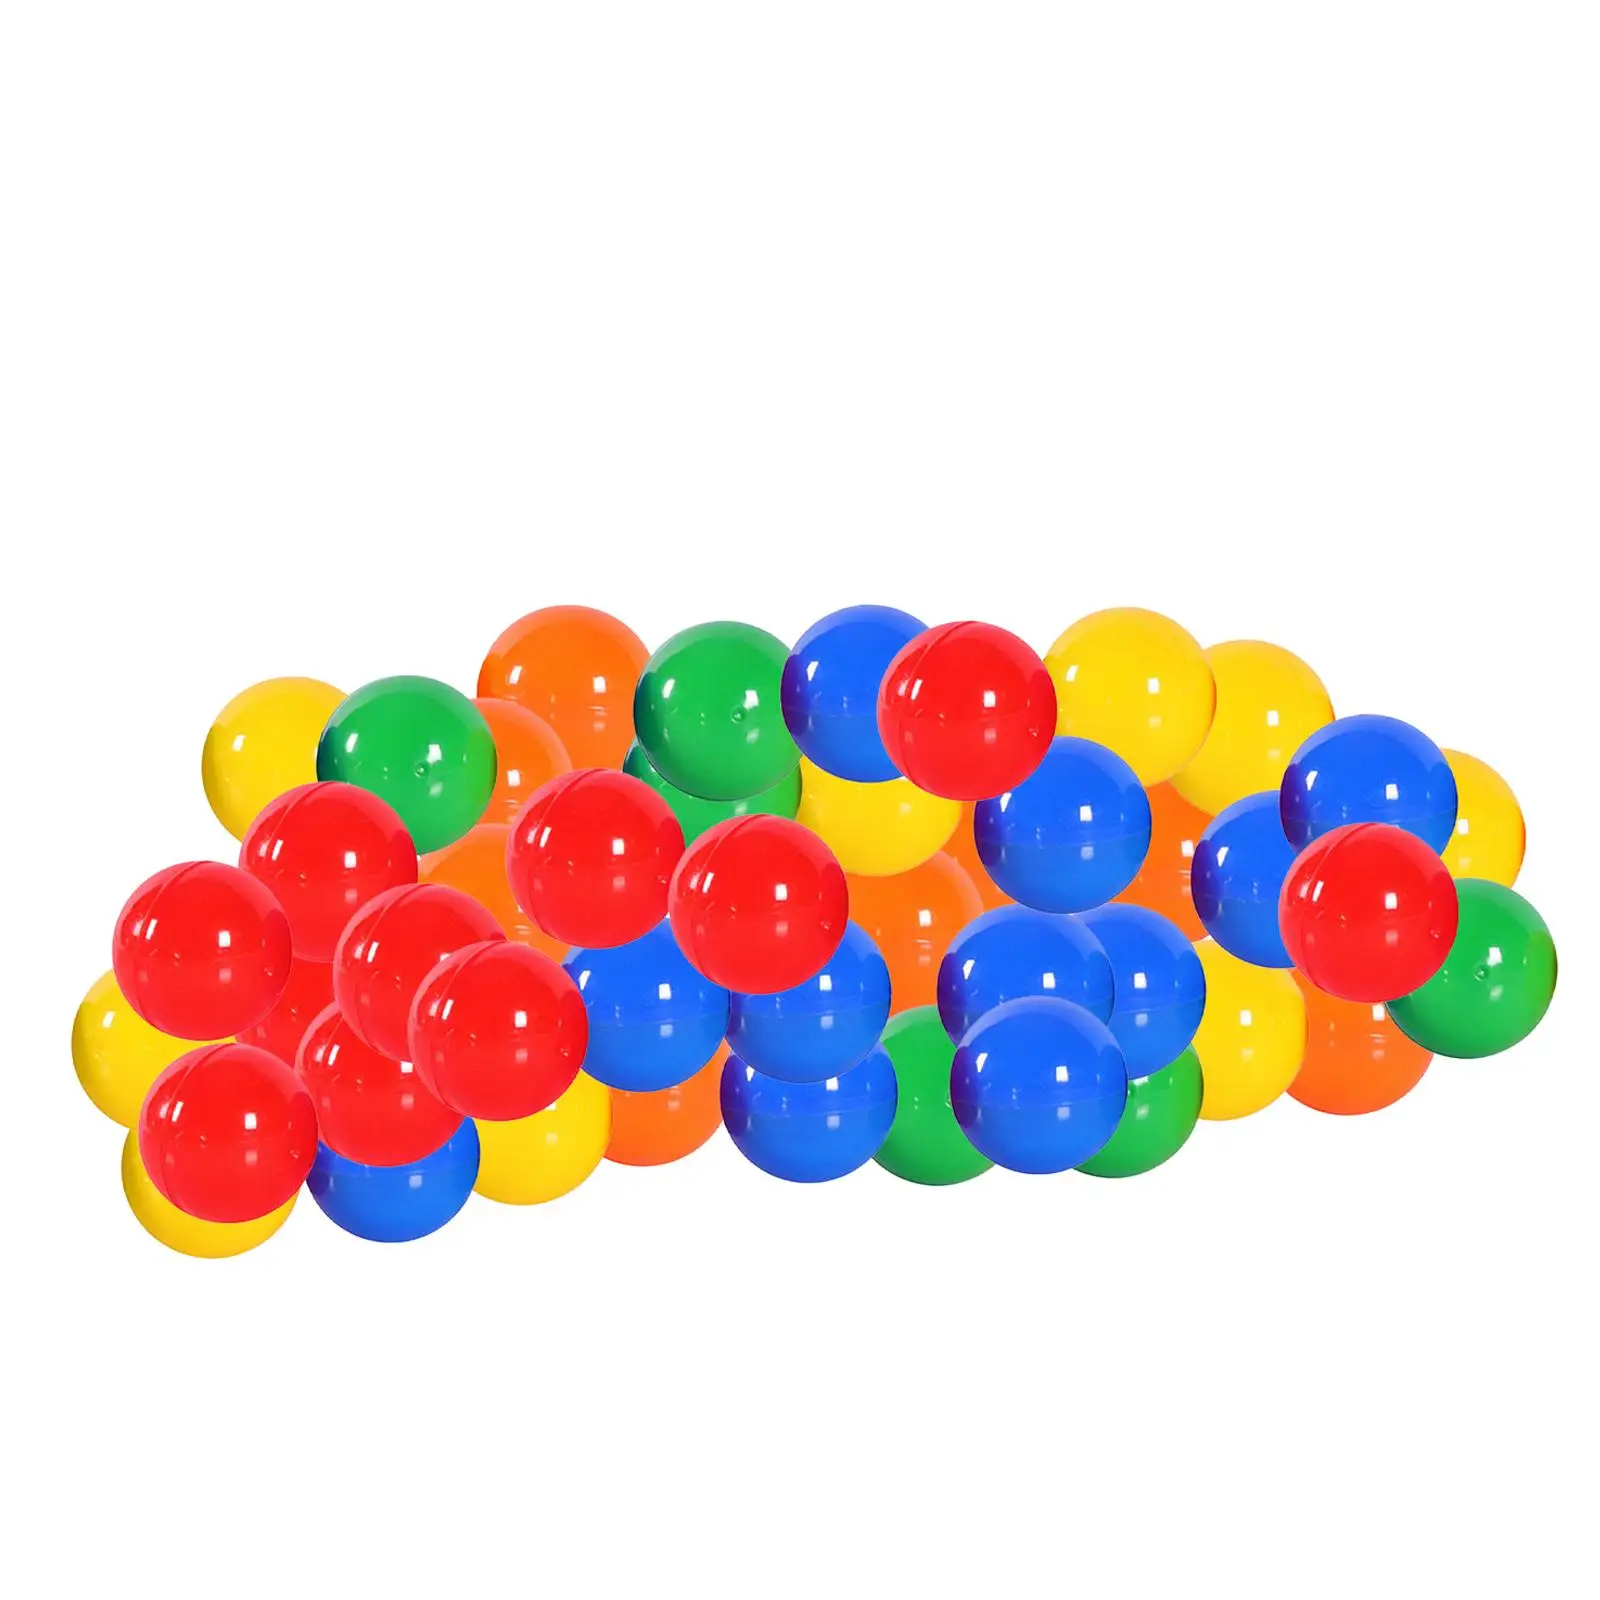 50x Bingo Ball Opening Replacement Parts Fittings Portable Calling Balls Raffle Balls for Office home Game Parties Nights